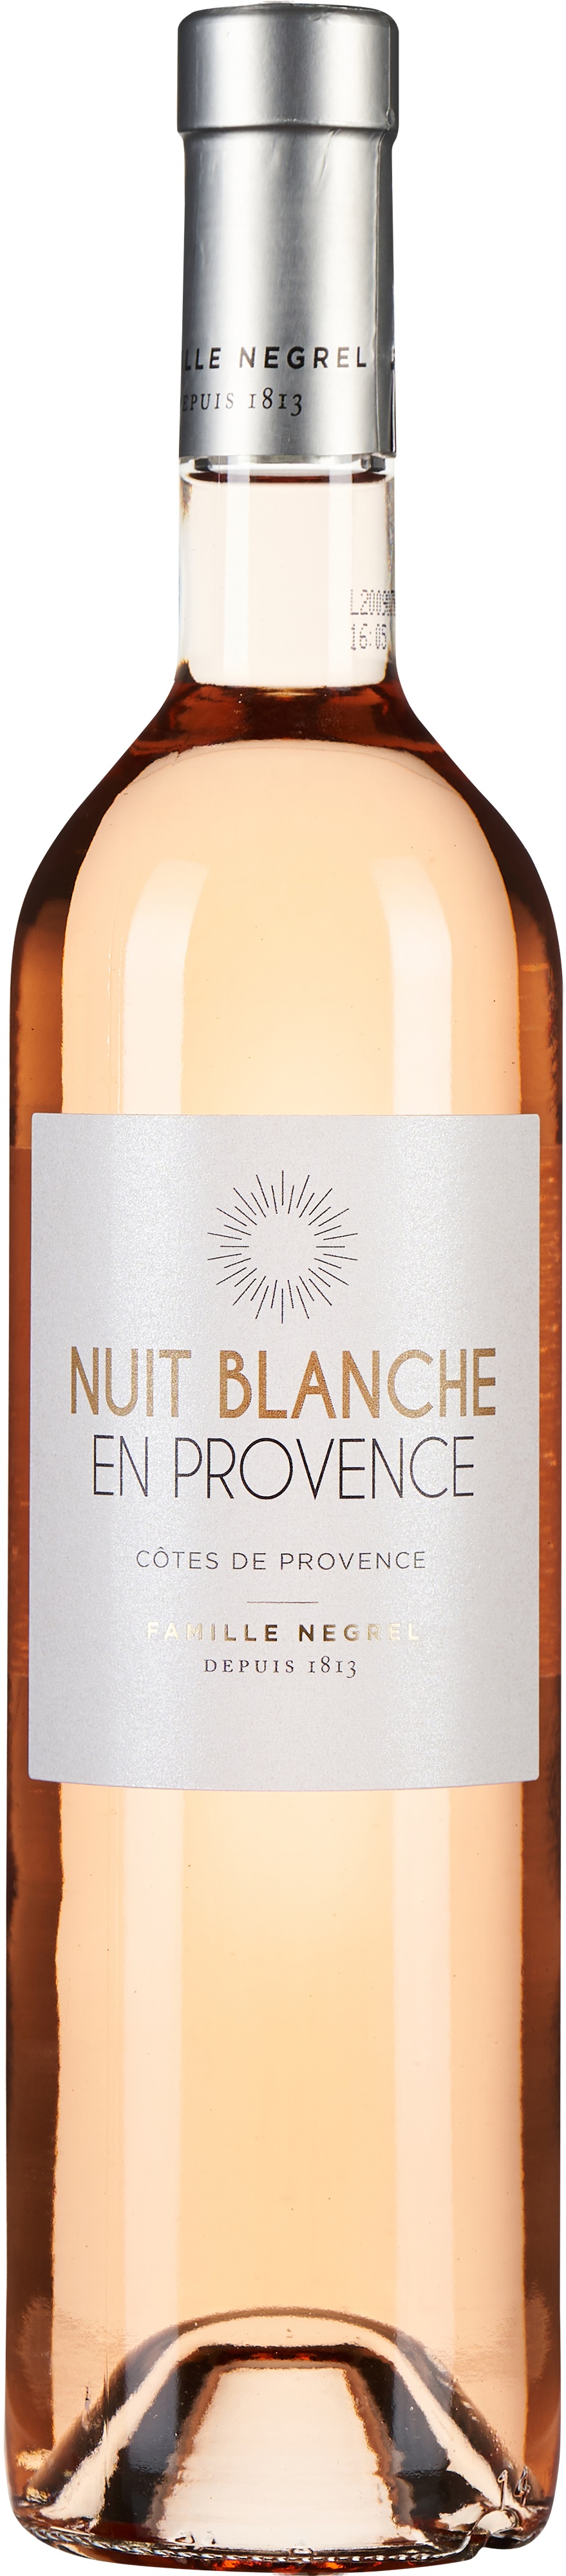 71888 Nuit Blanche Ros 2019 0,75 liter